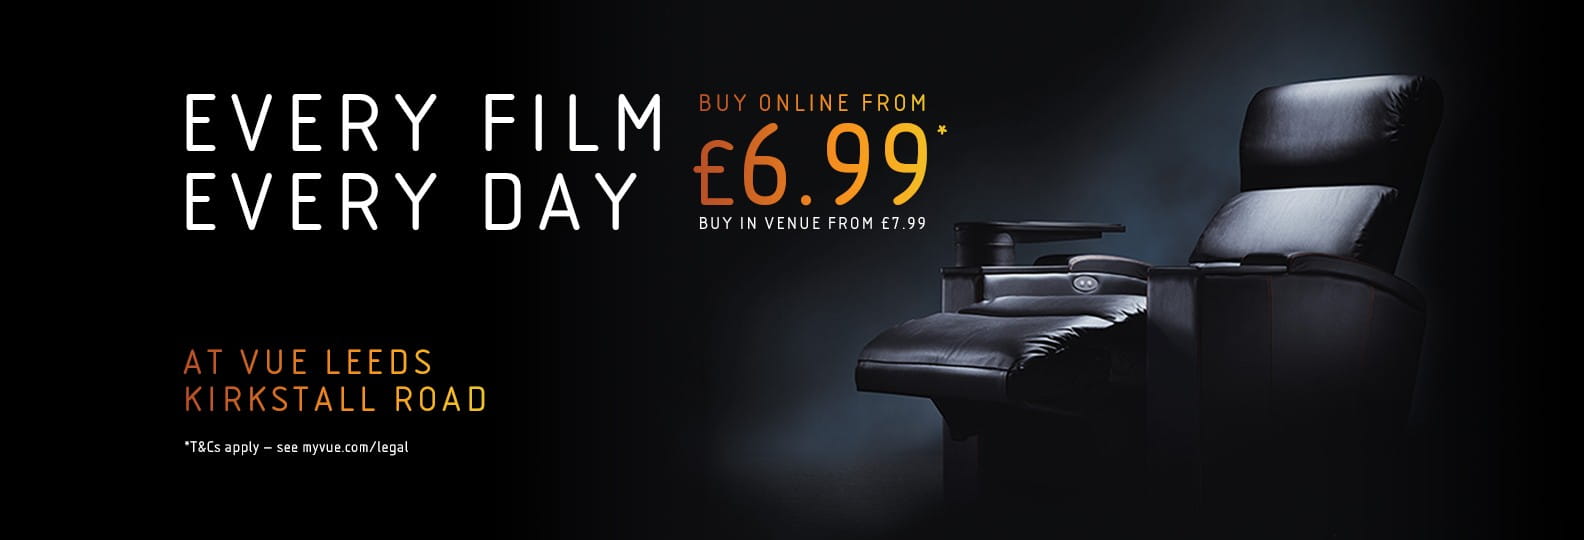 Every Day, Every Film from £6.99 at Vue Leeds Kirkstall Road